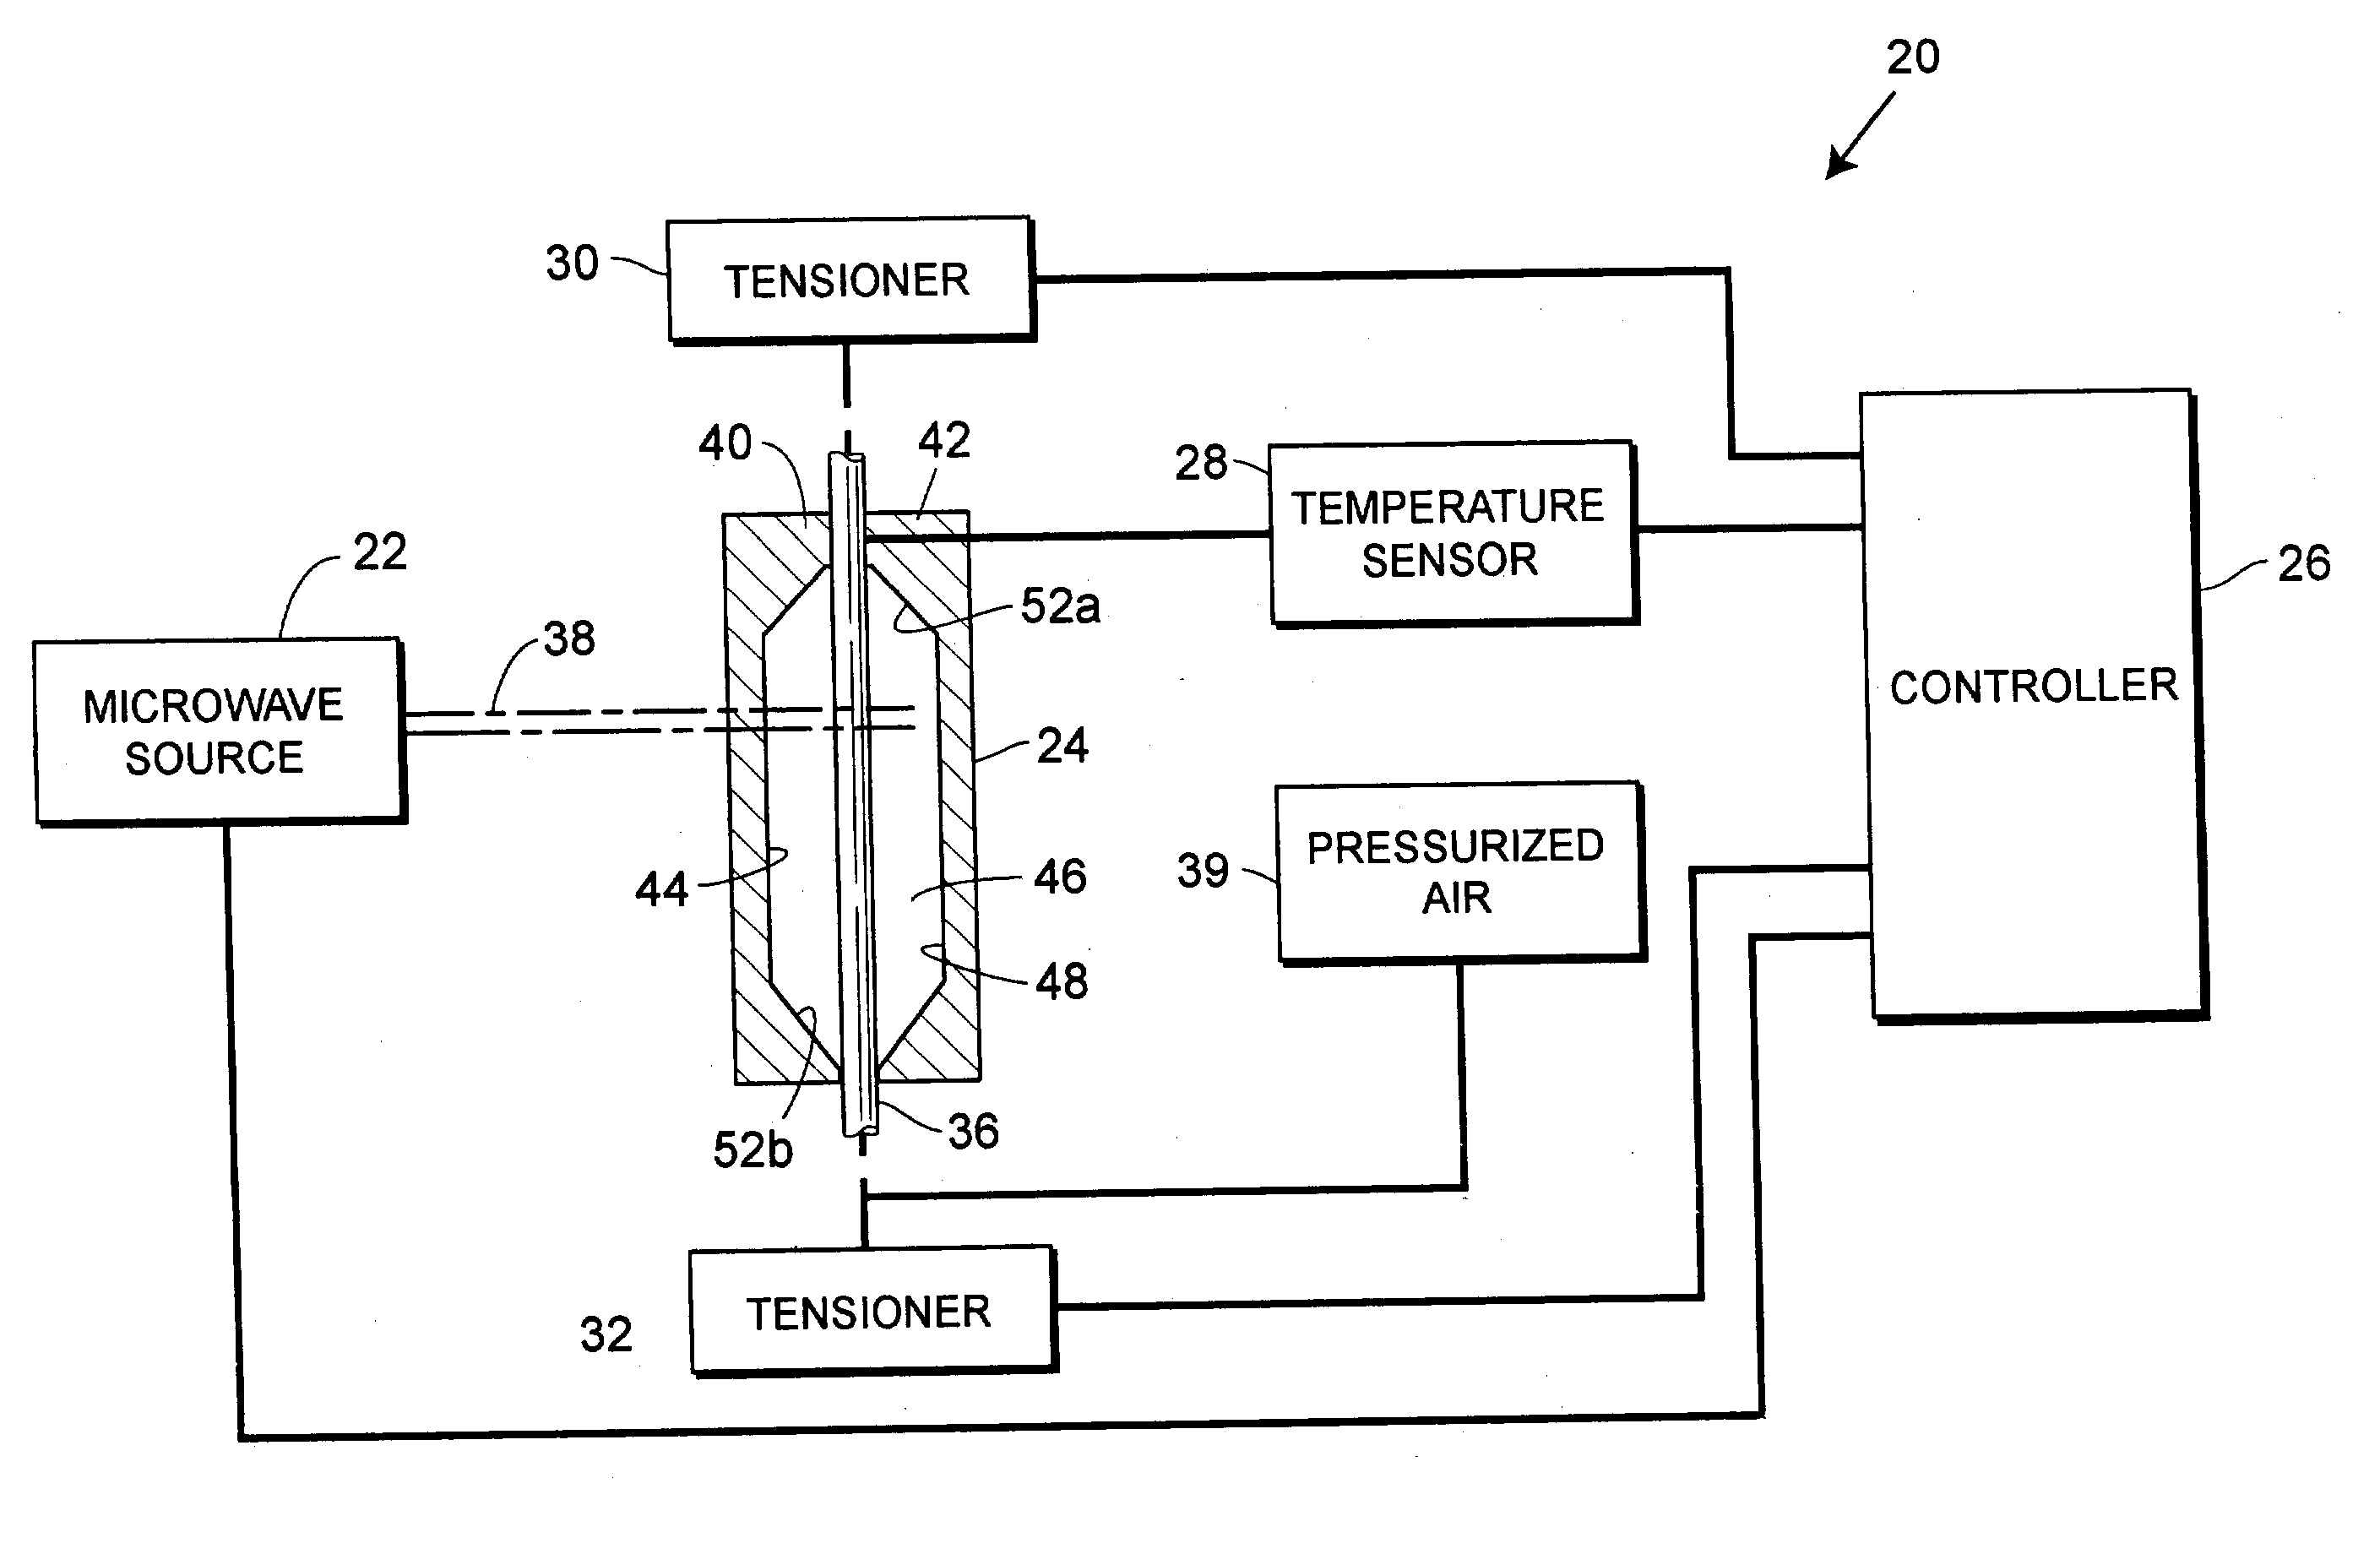 Method and apparatus for extruding polymers employing microwave energy